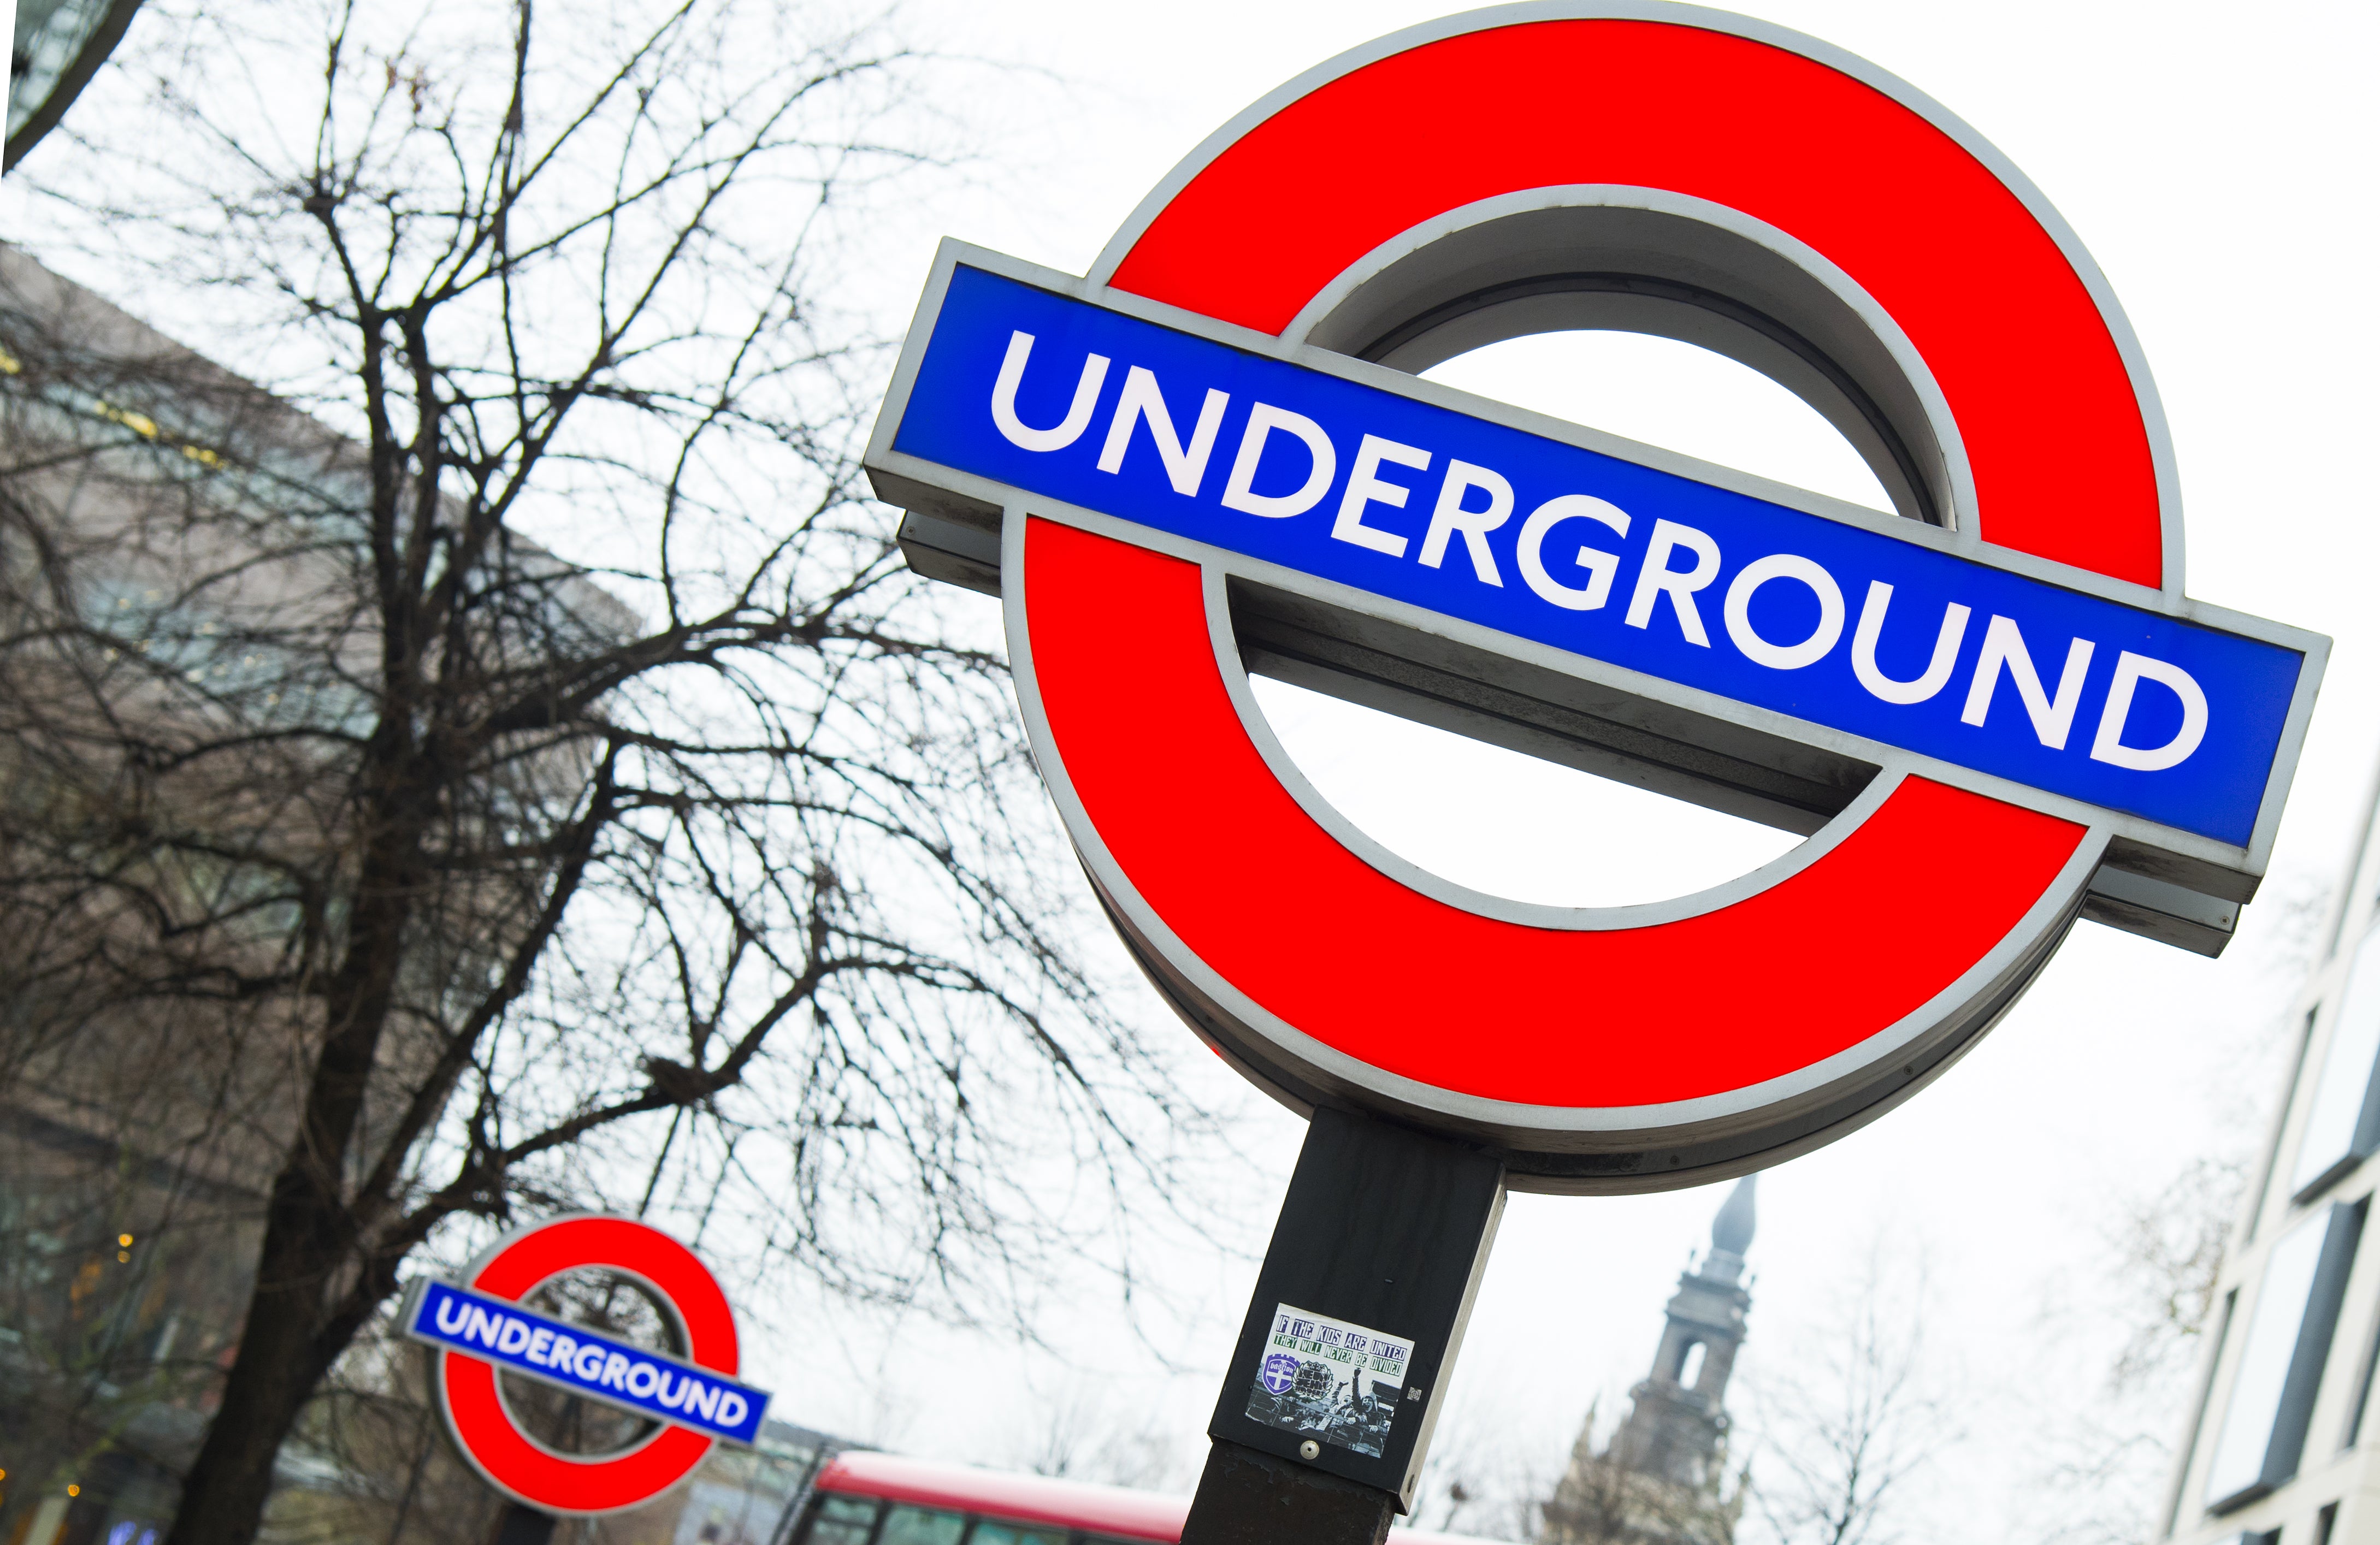 Next month members of the RMT union working on the London Underground will go on strike